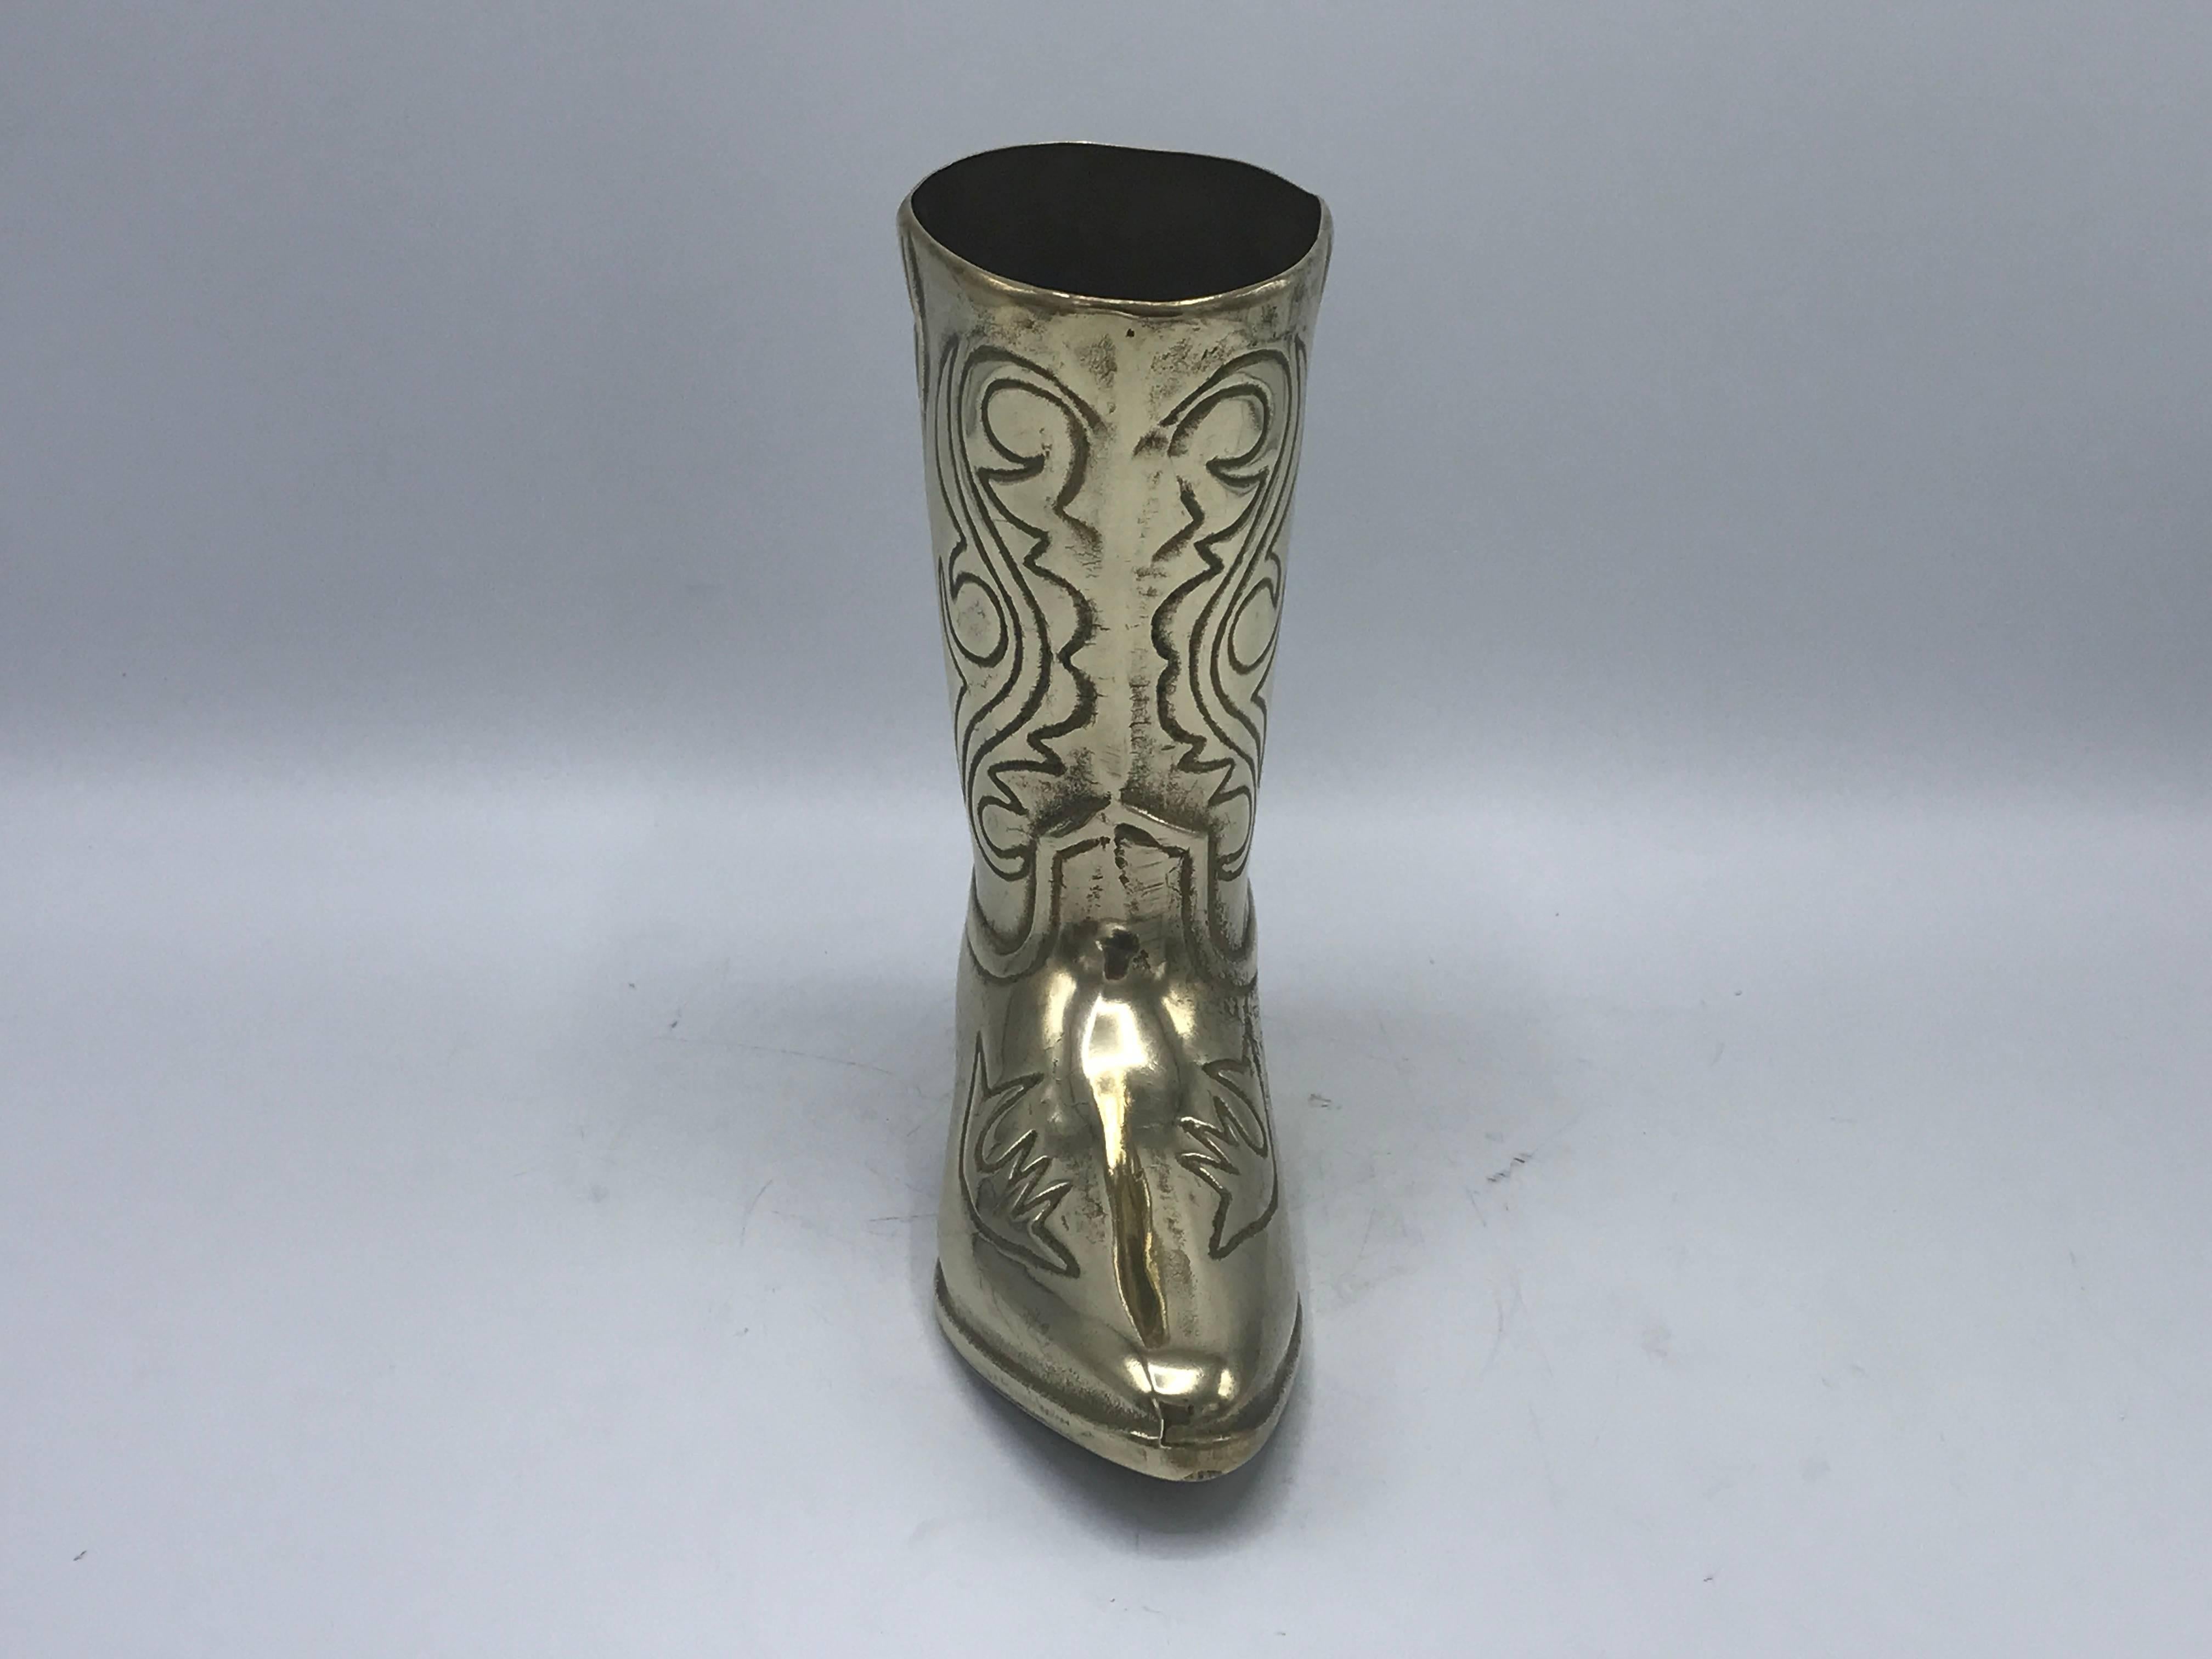 Offered is a beautiful, 1970s brass cowboy boot sculptural cachepot vase. Heavy.